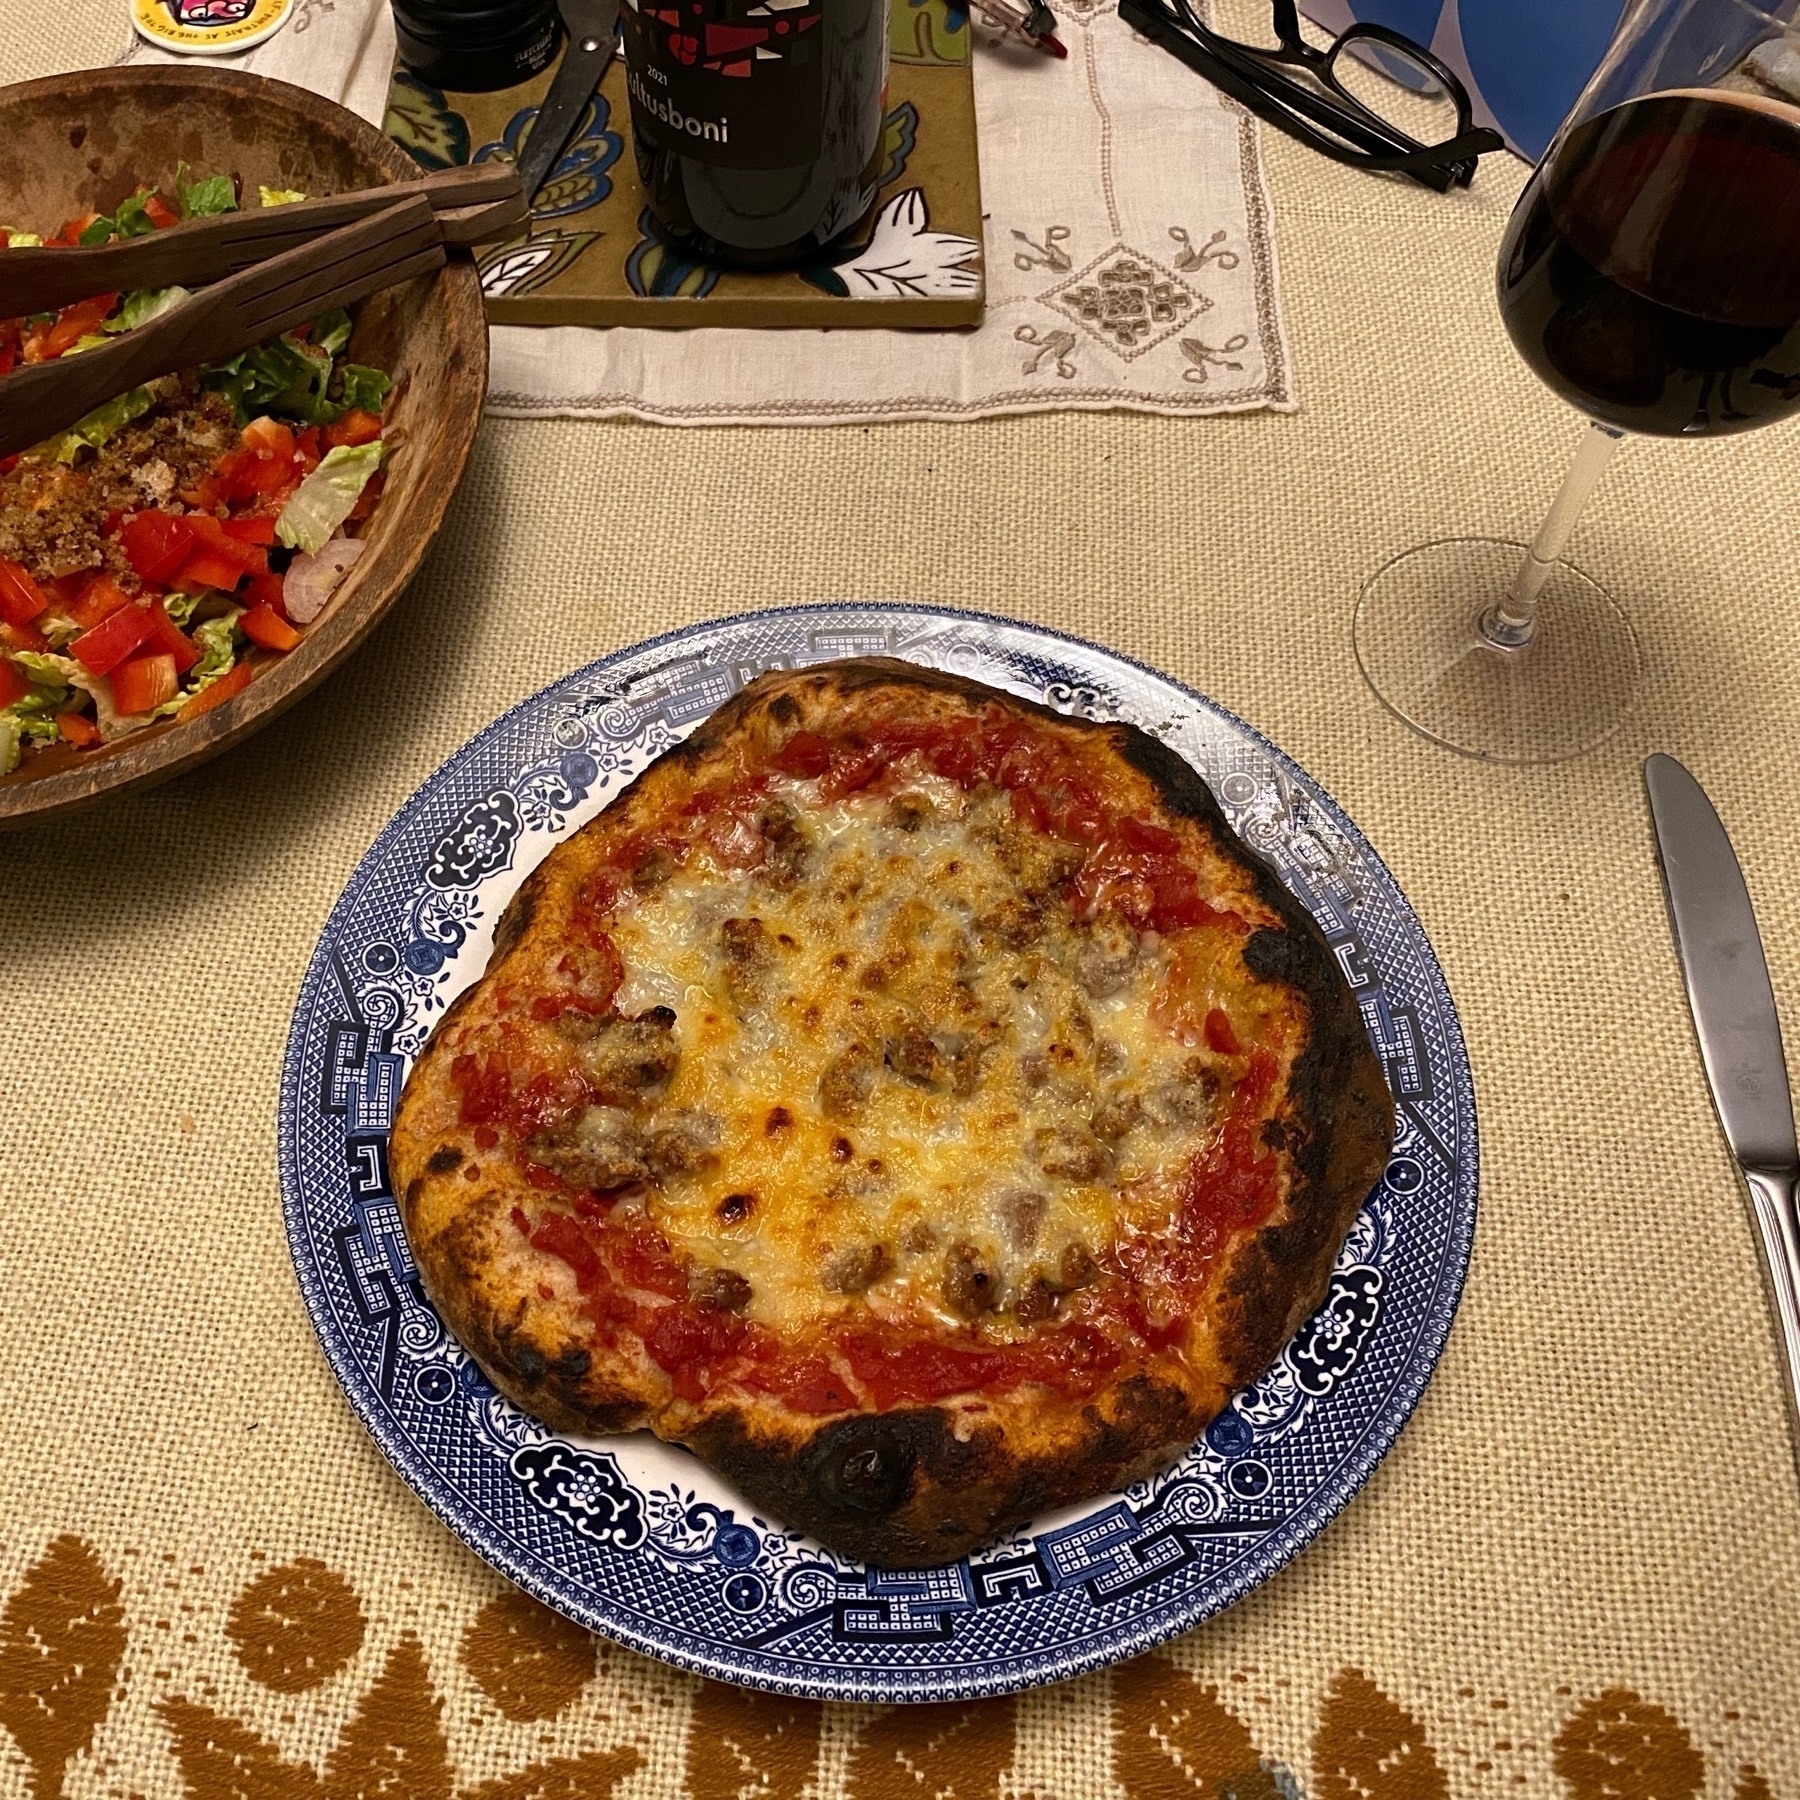 Small pizza on a blue plate, sitting on a table with a light brown tablecloth, salad, wine and utensils in the background.